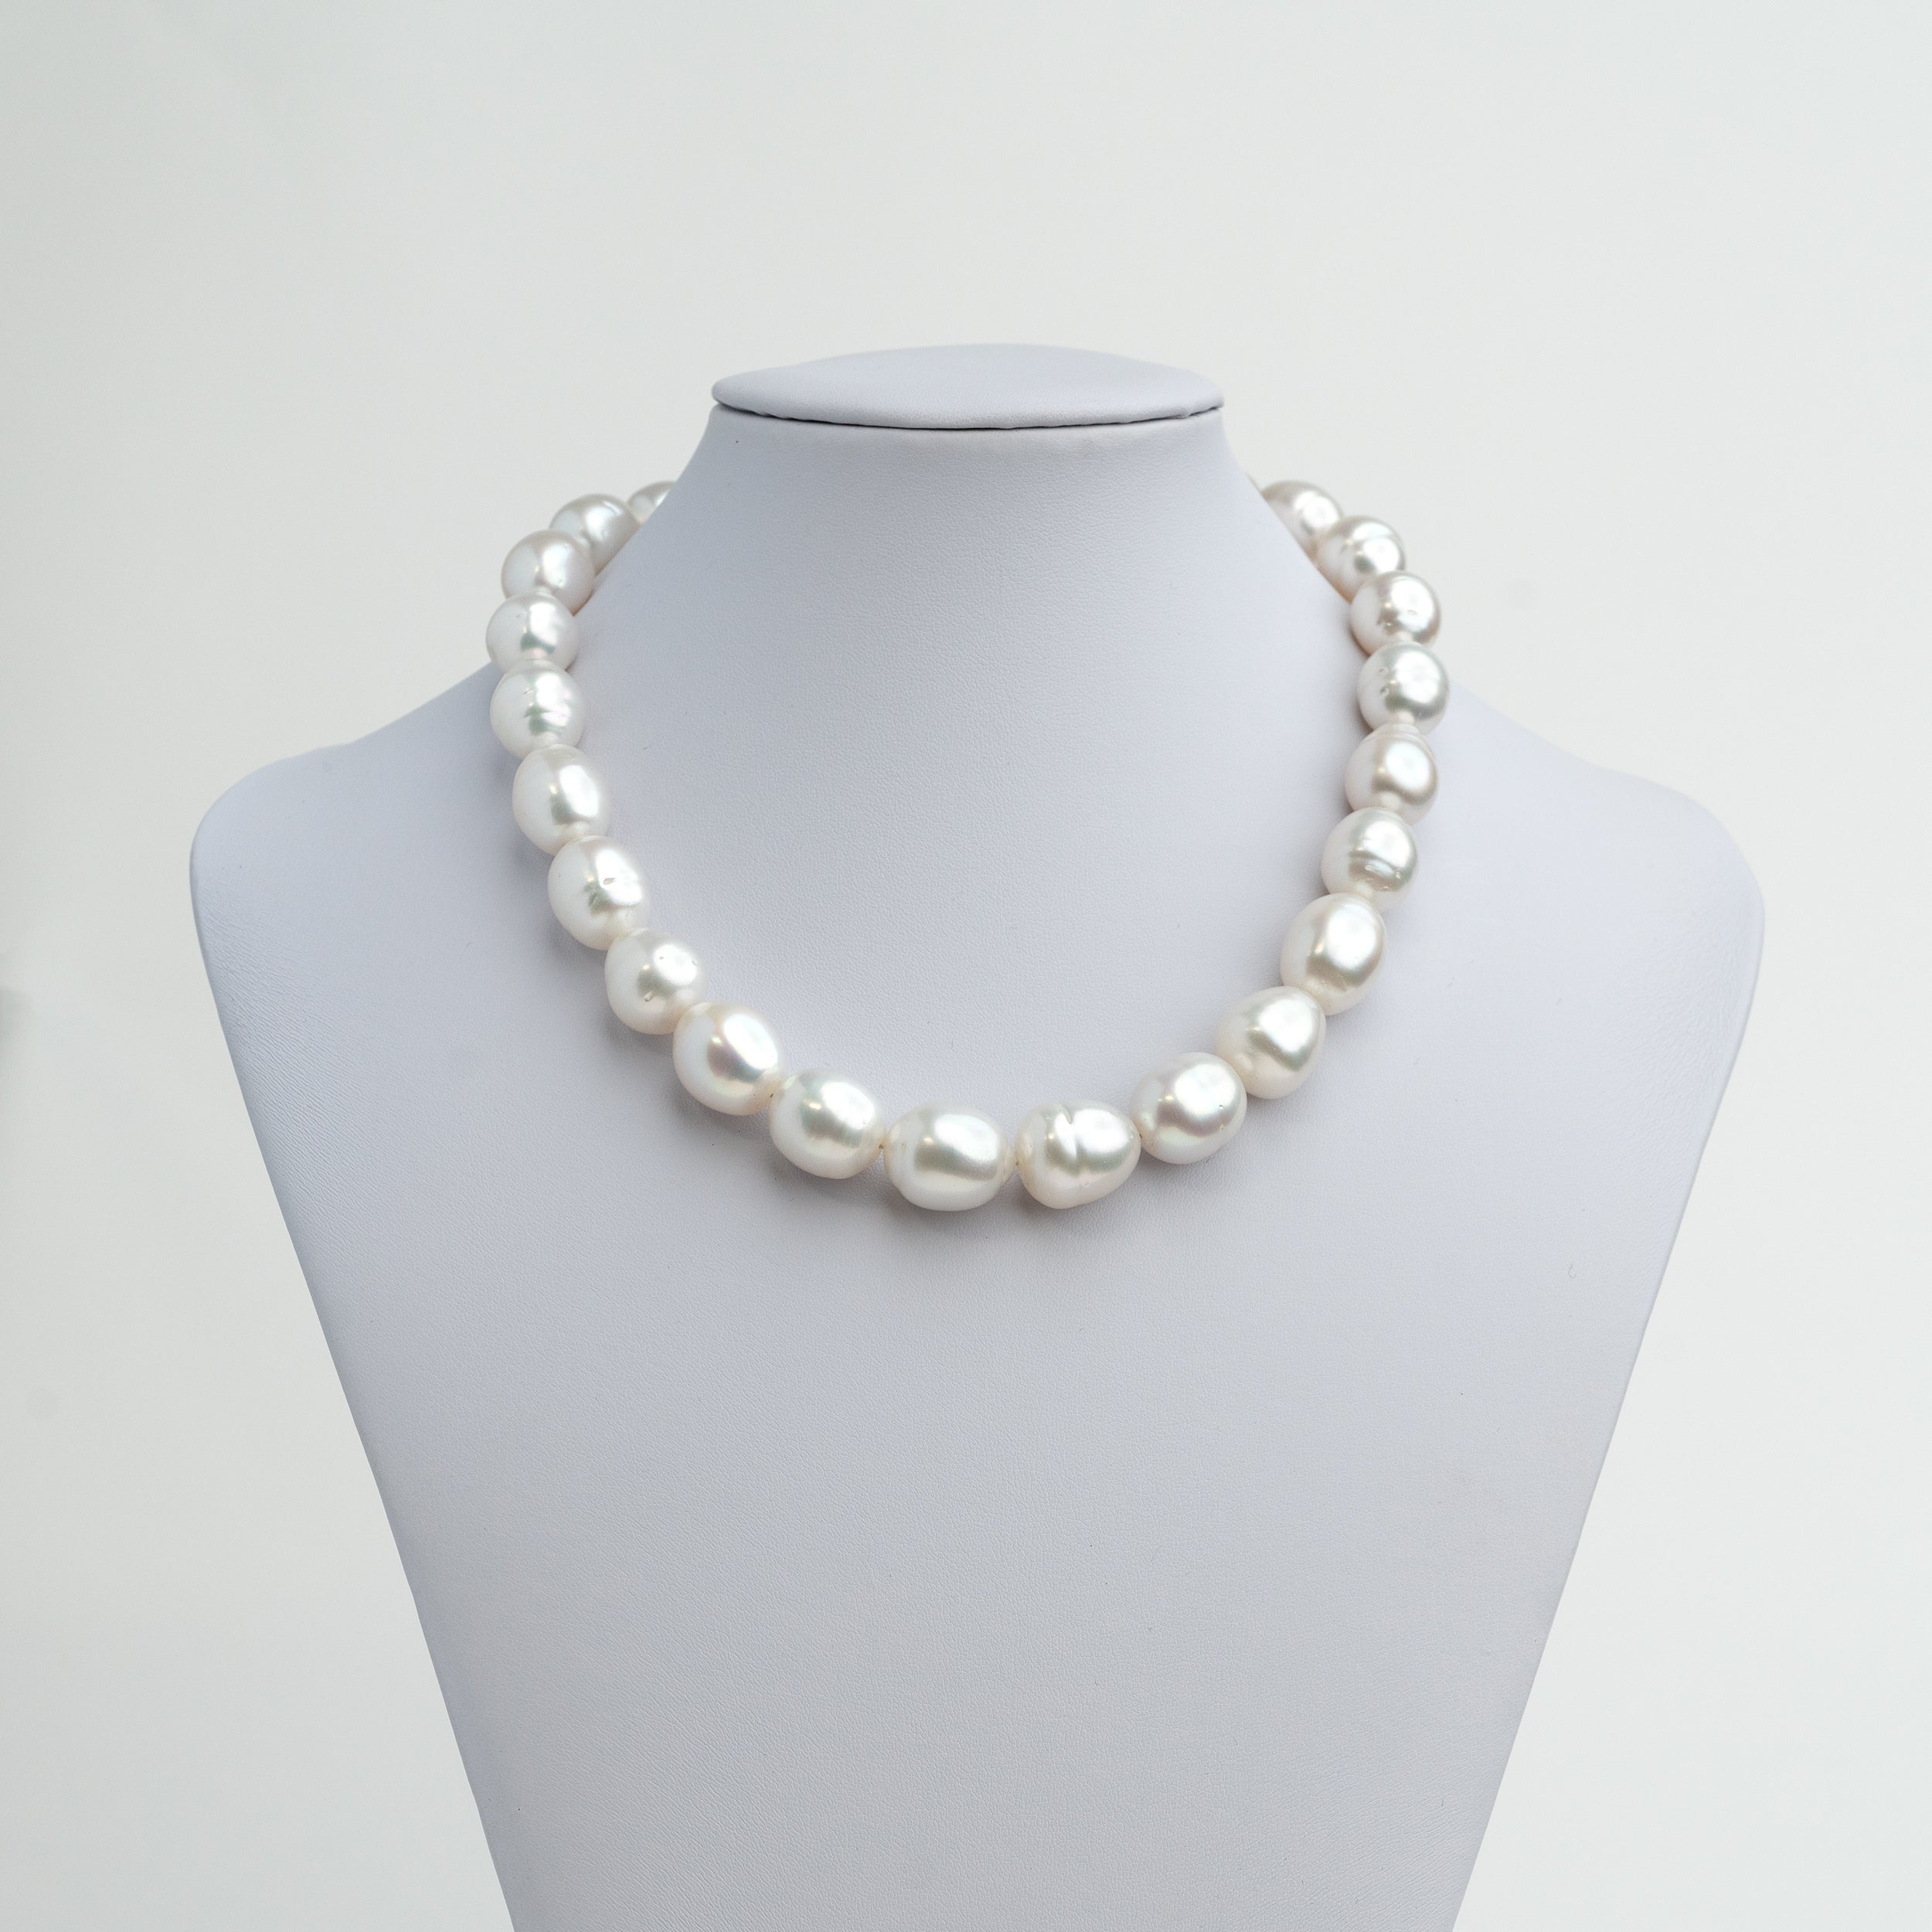 12 - AAA Oval Australian Cultured Pearl Necklace